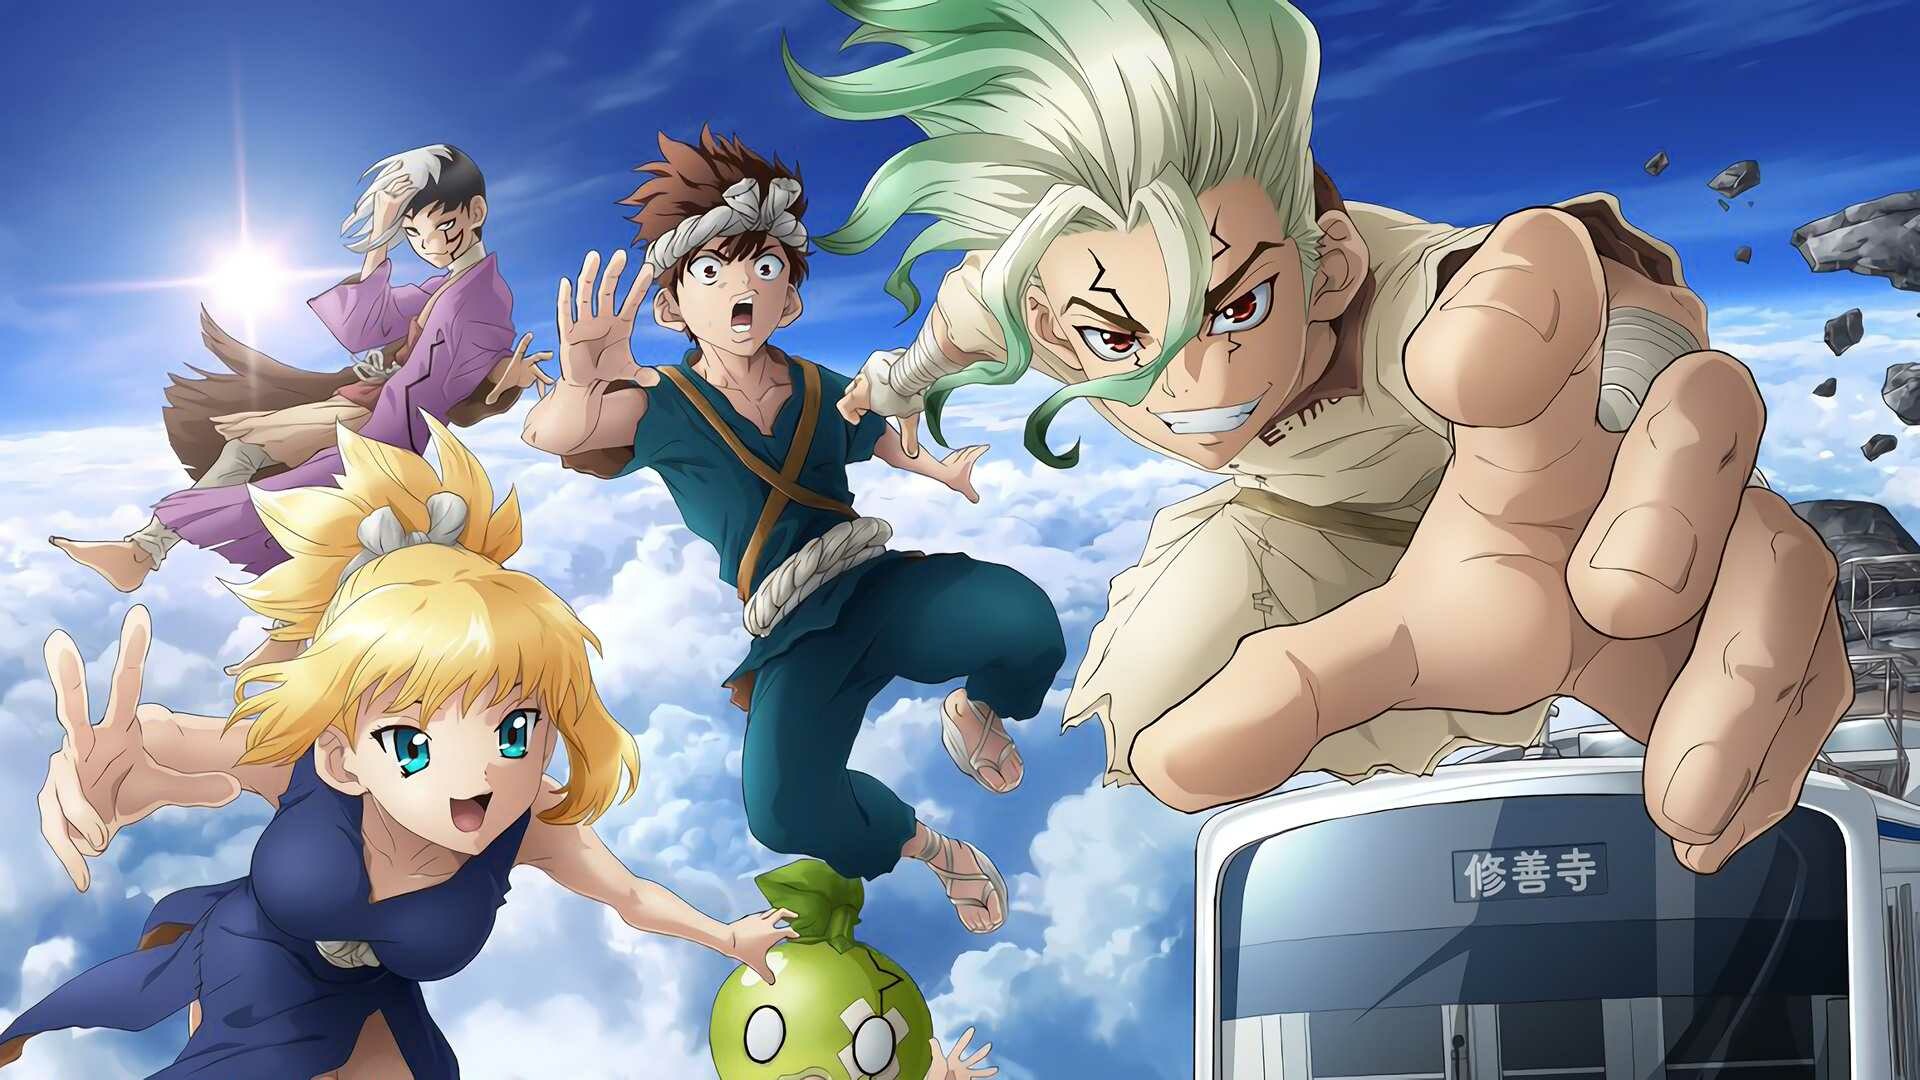 Dr.STONE: A noteworthy anime that educates everyone about science in an interesting way. 1920x1080 Full HD Wallpaper.